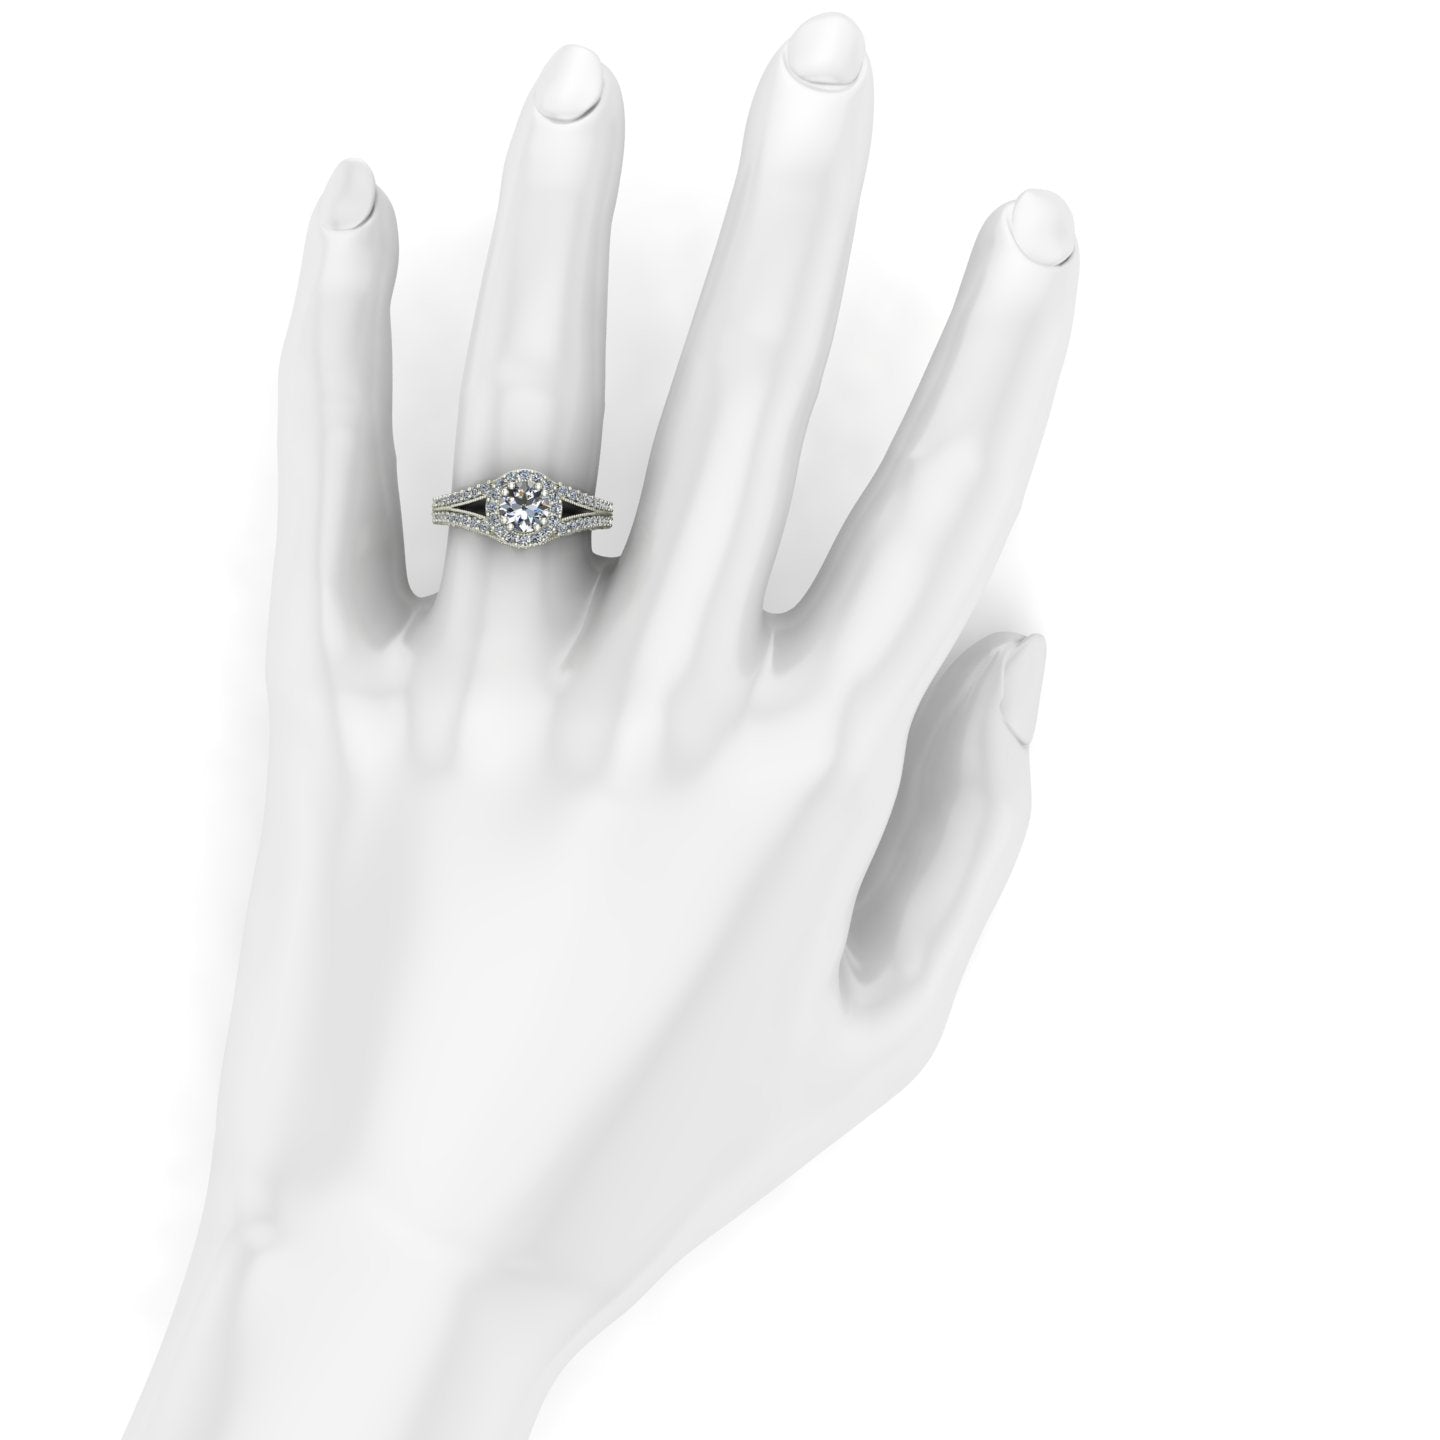 three quarter carat diamond engagement ring with scallop design in 14k white gold - Charles Babb Designs - on hand